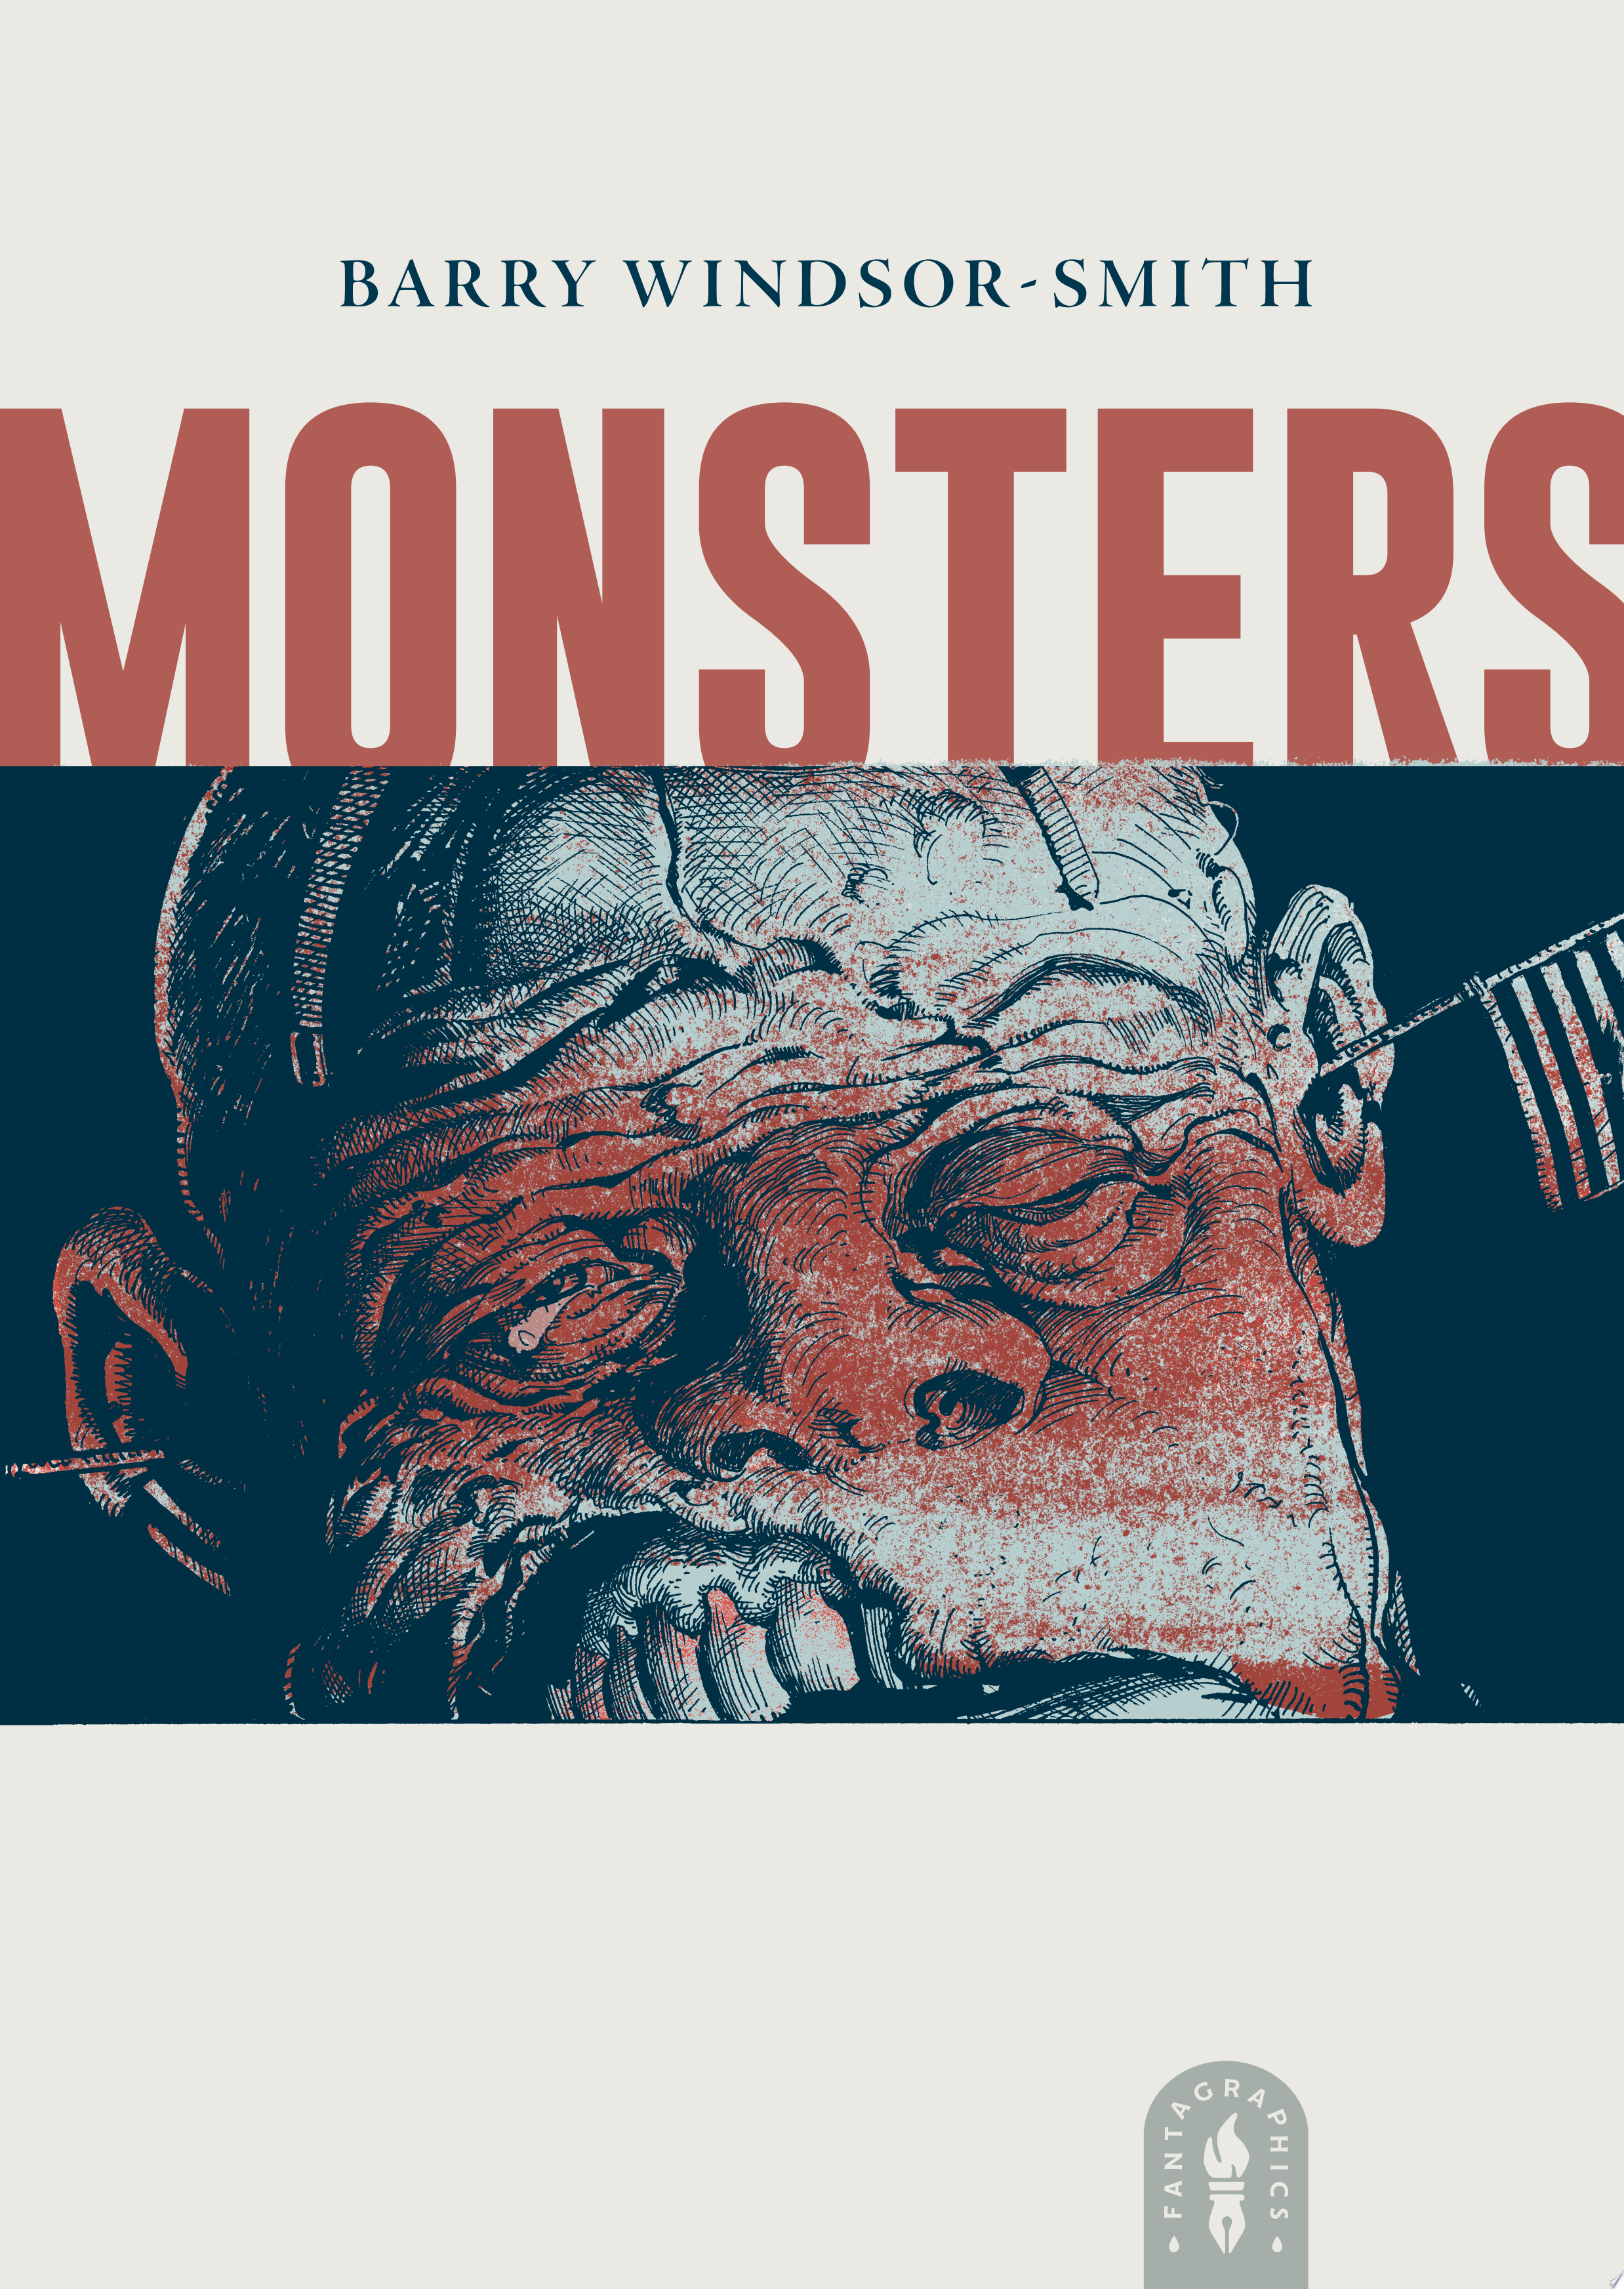 Image for "Monsters"